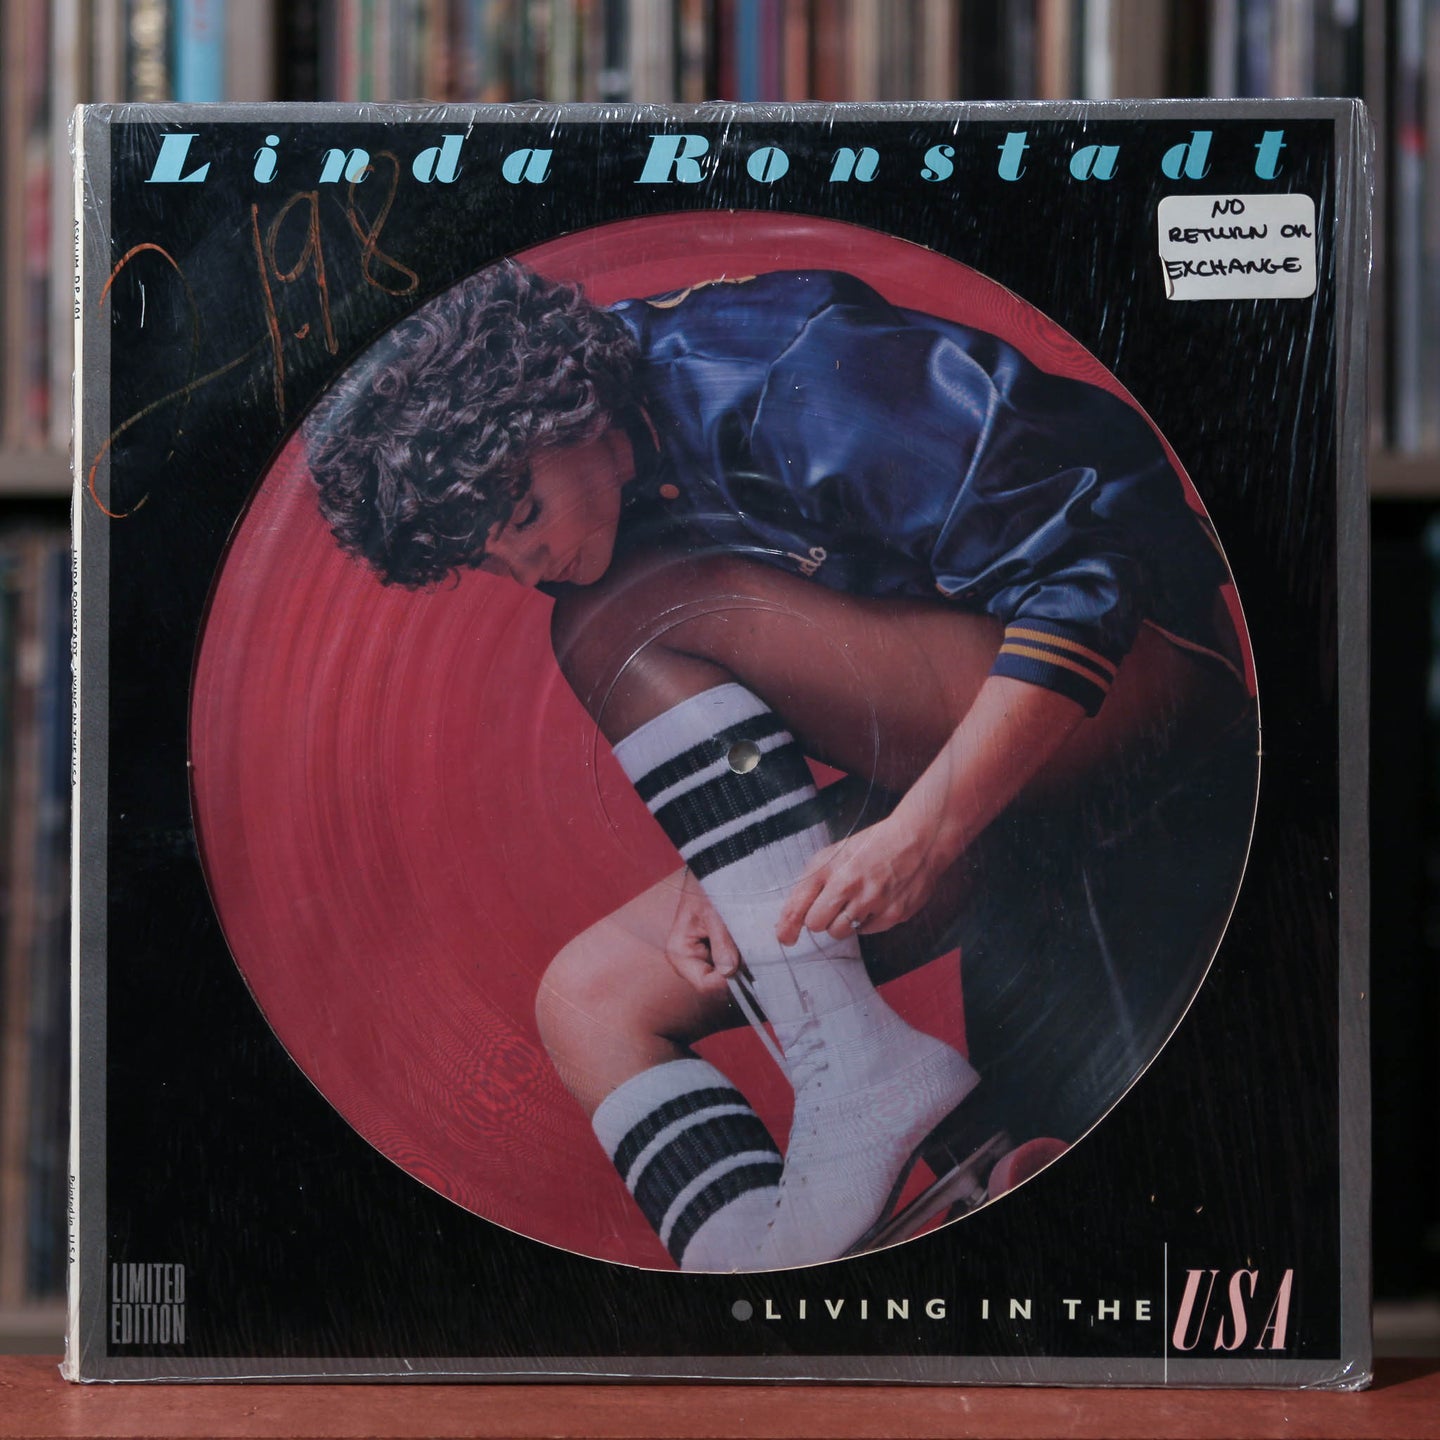 Linda Ronstadt - 2 Sealed Albums Bundle - 1 Picture Disc - Mad Love/Living in the USA, SEALED